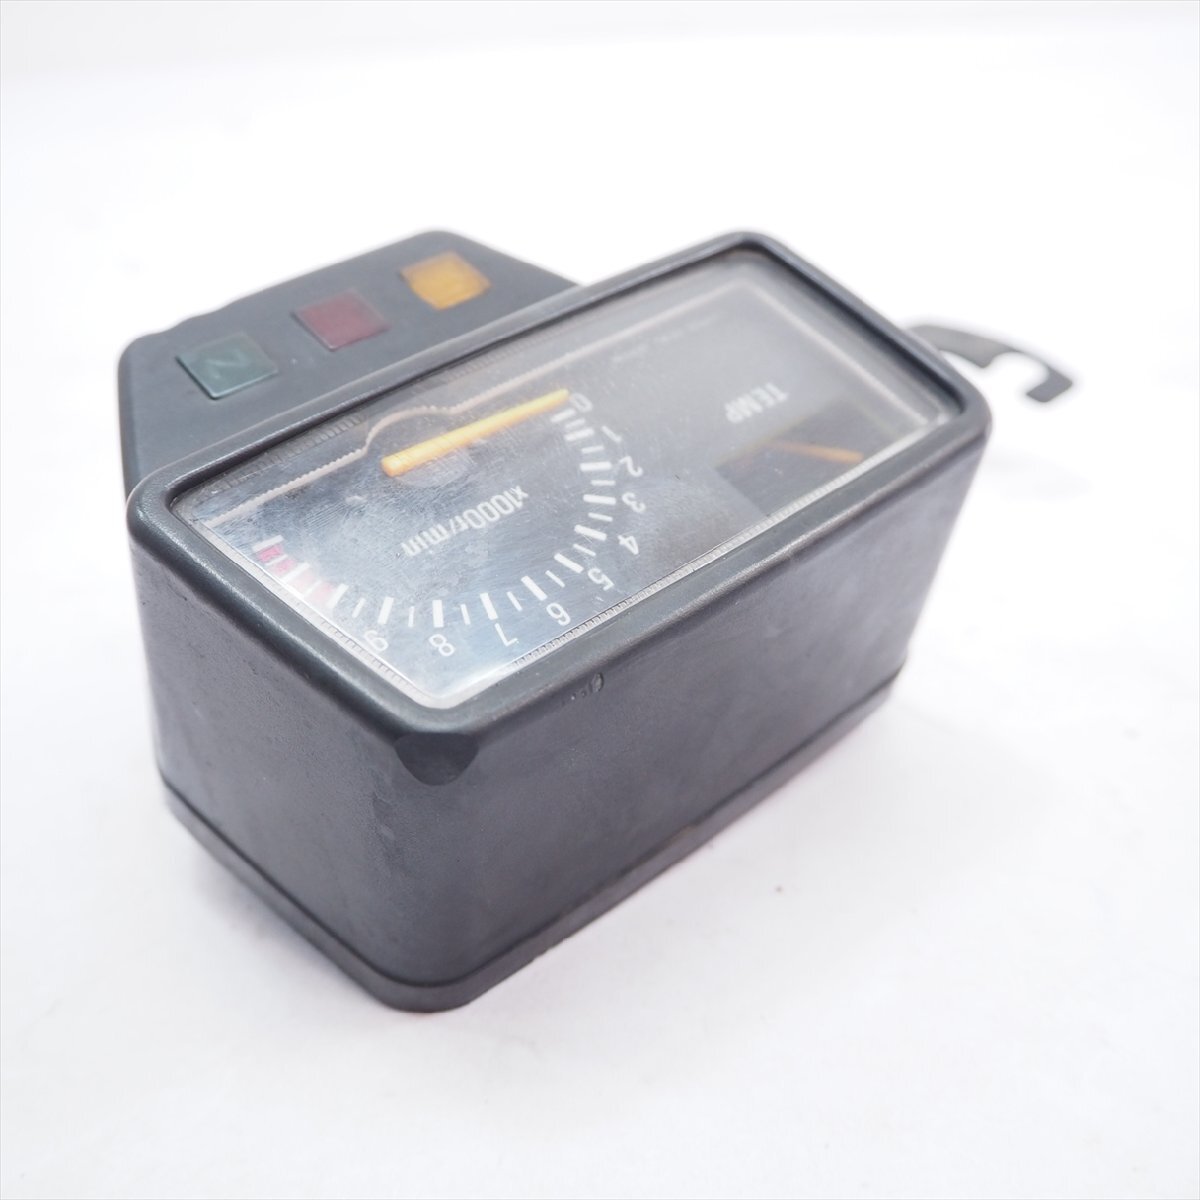 DT50 17W-469 96 year remove original tachometer meter meter stay DT50LC 91-97 year 3LM5